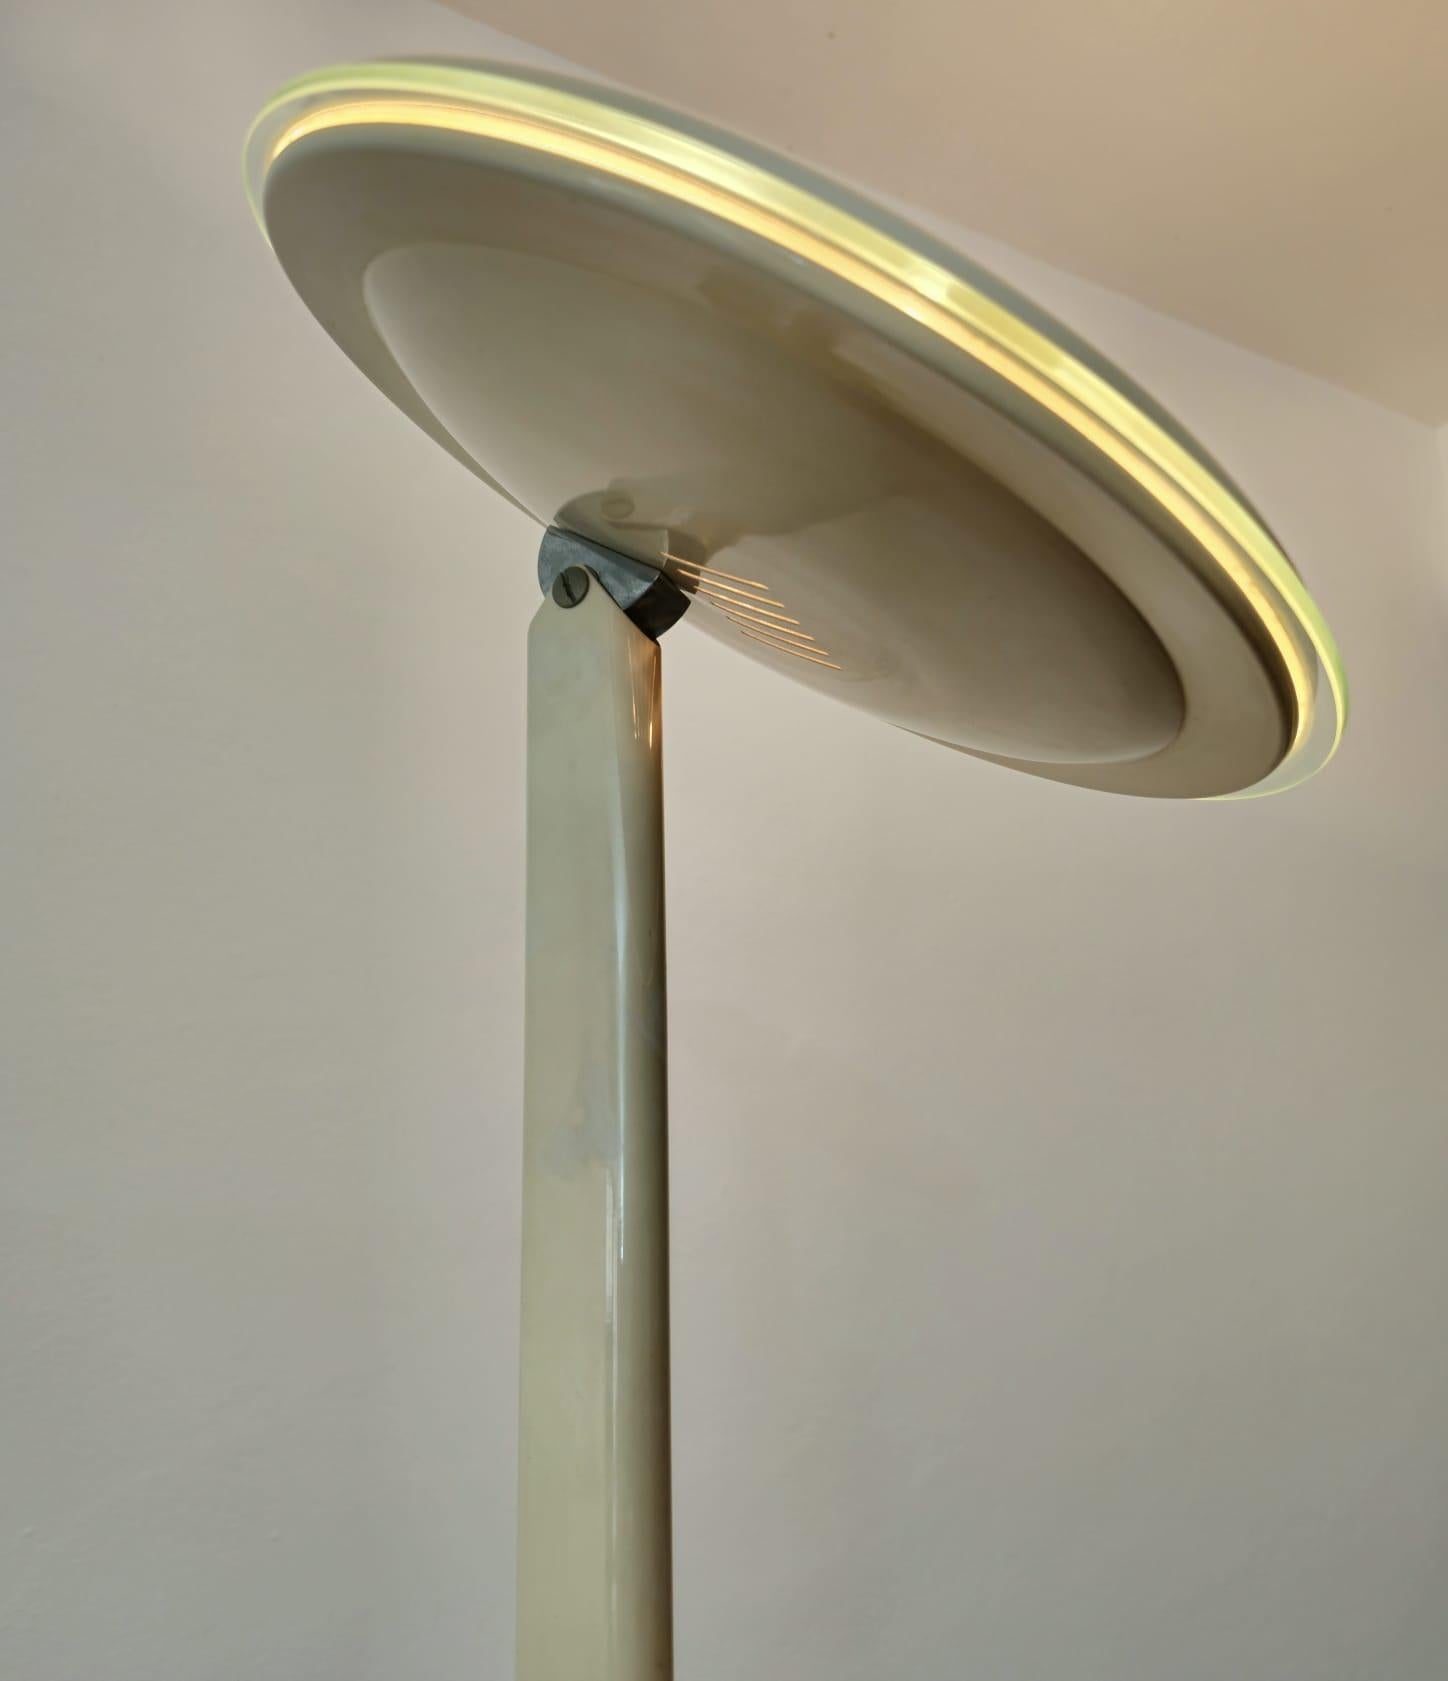 Vintage enamelled aluminum floor lamp, Italy, 1980s
Excellently made halogen floor lamp in beige enamelled metal with directional diffuser with circular transparent glass disc, which gives a touch of elegance. Produced in Italy between the 80s and